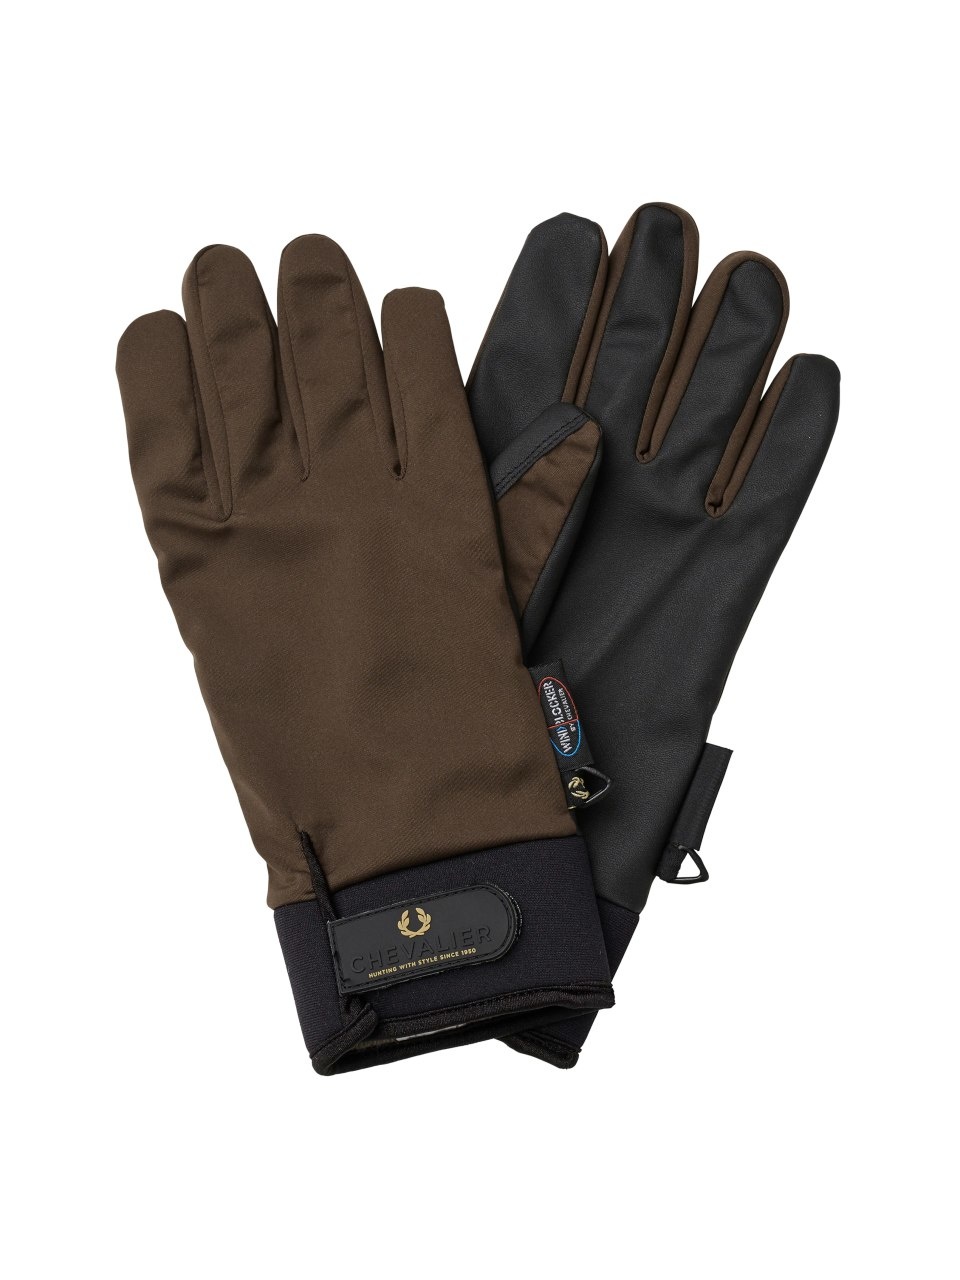 Chevalier Shooting Glove WB Warm Leather Brown-1